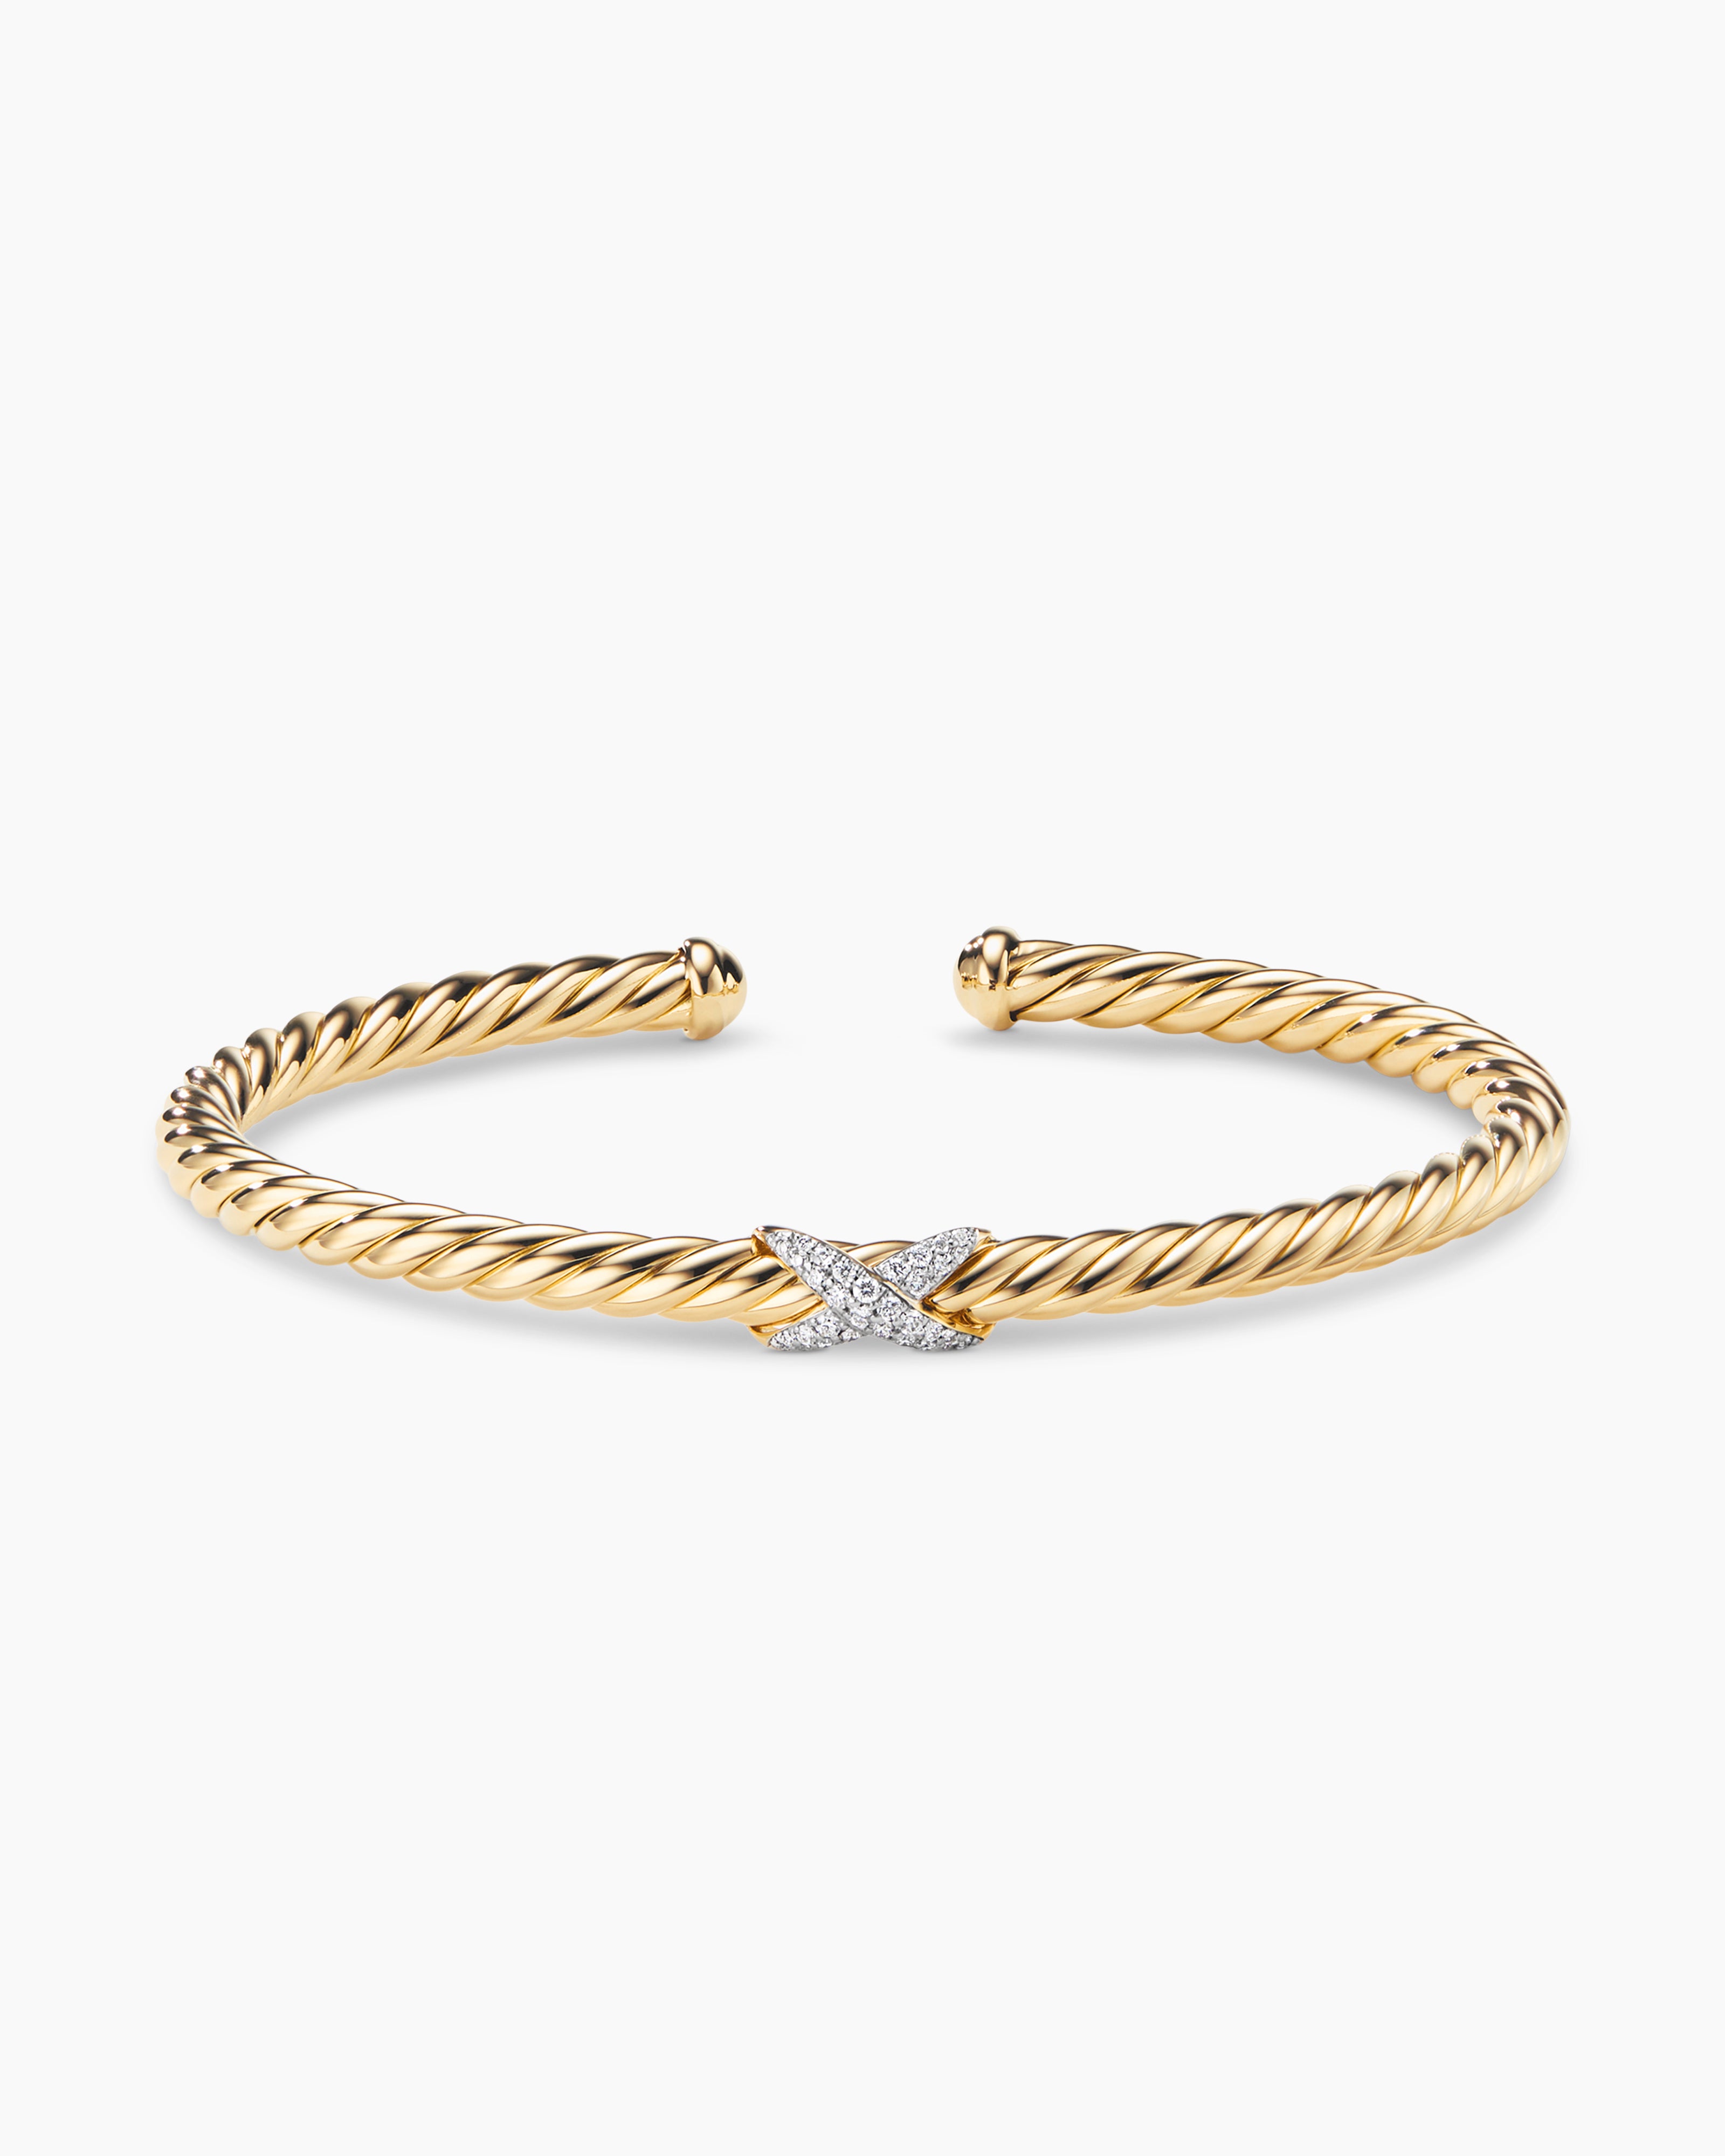 Classic Cablespira Bracelet in 18K Yellow Gold with Diamonds, 5mm